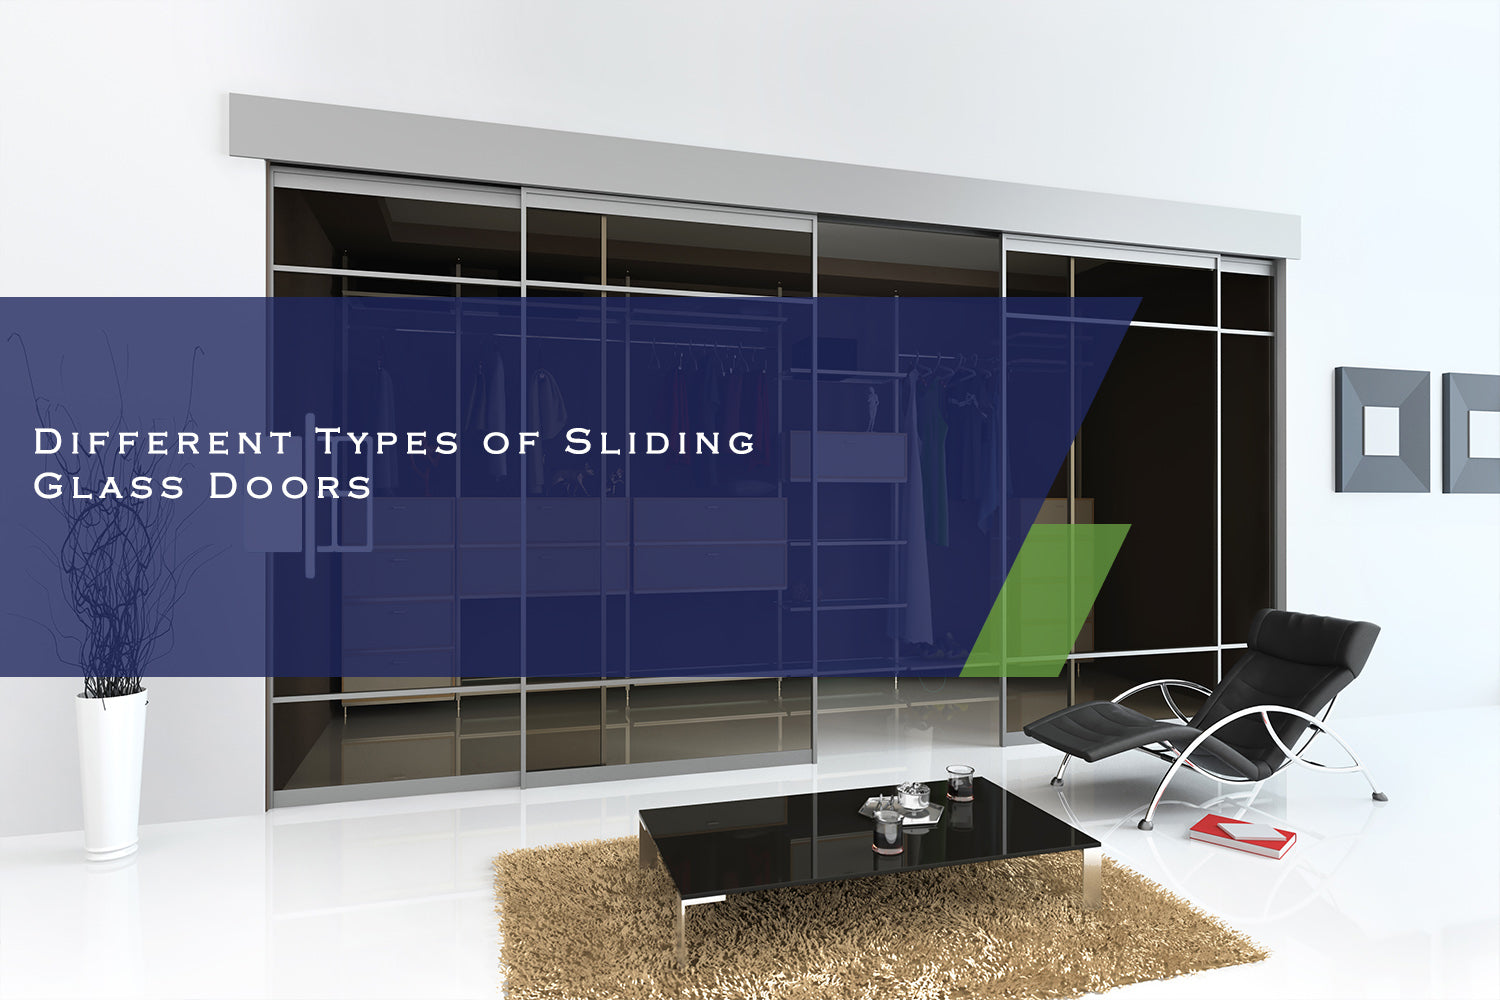 Different Types of Sliding Glass Doors